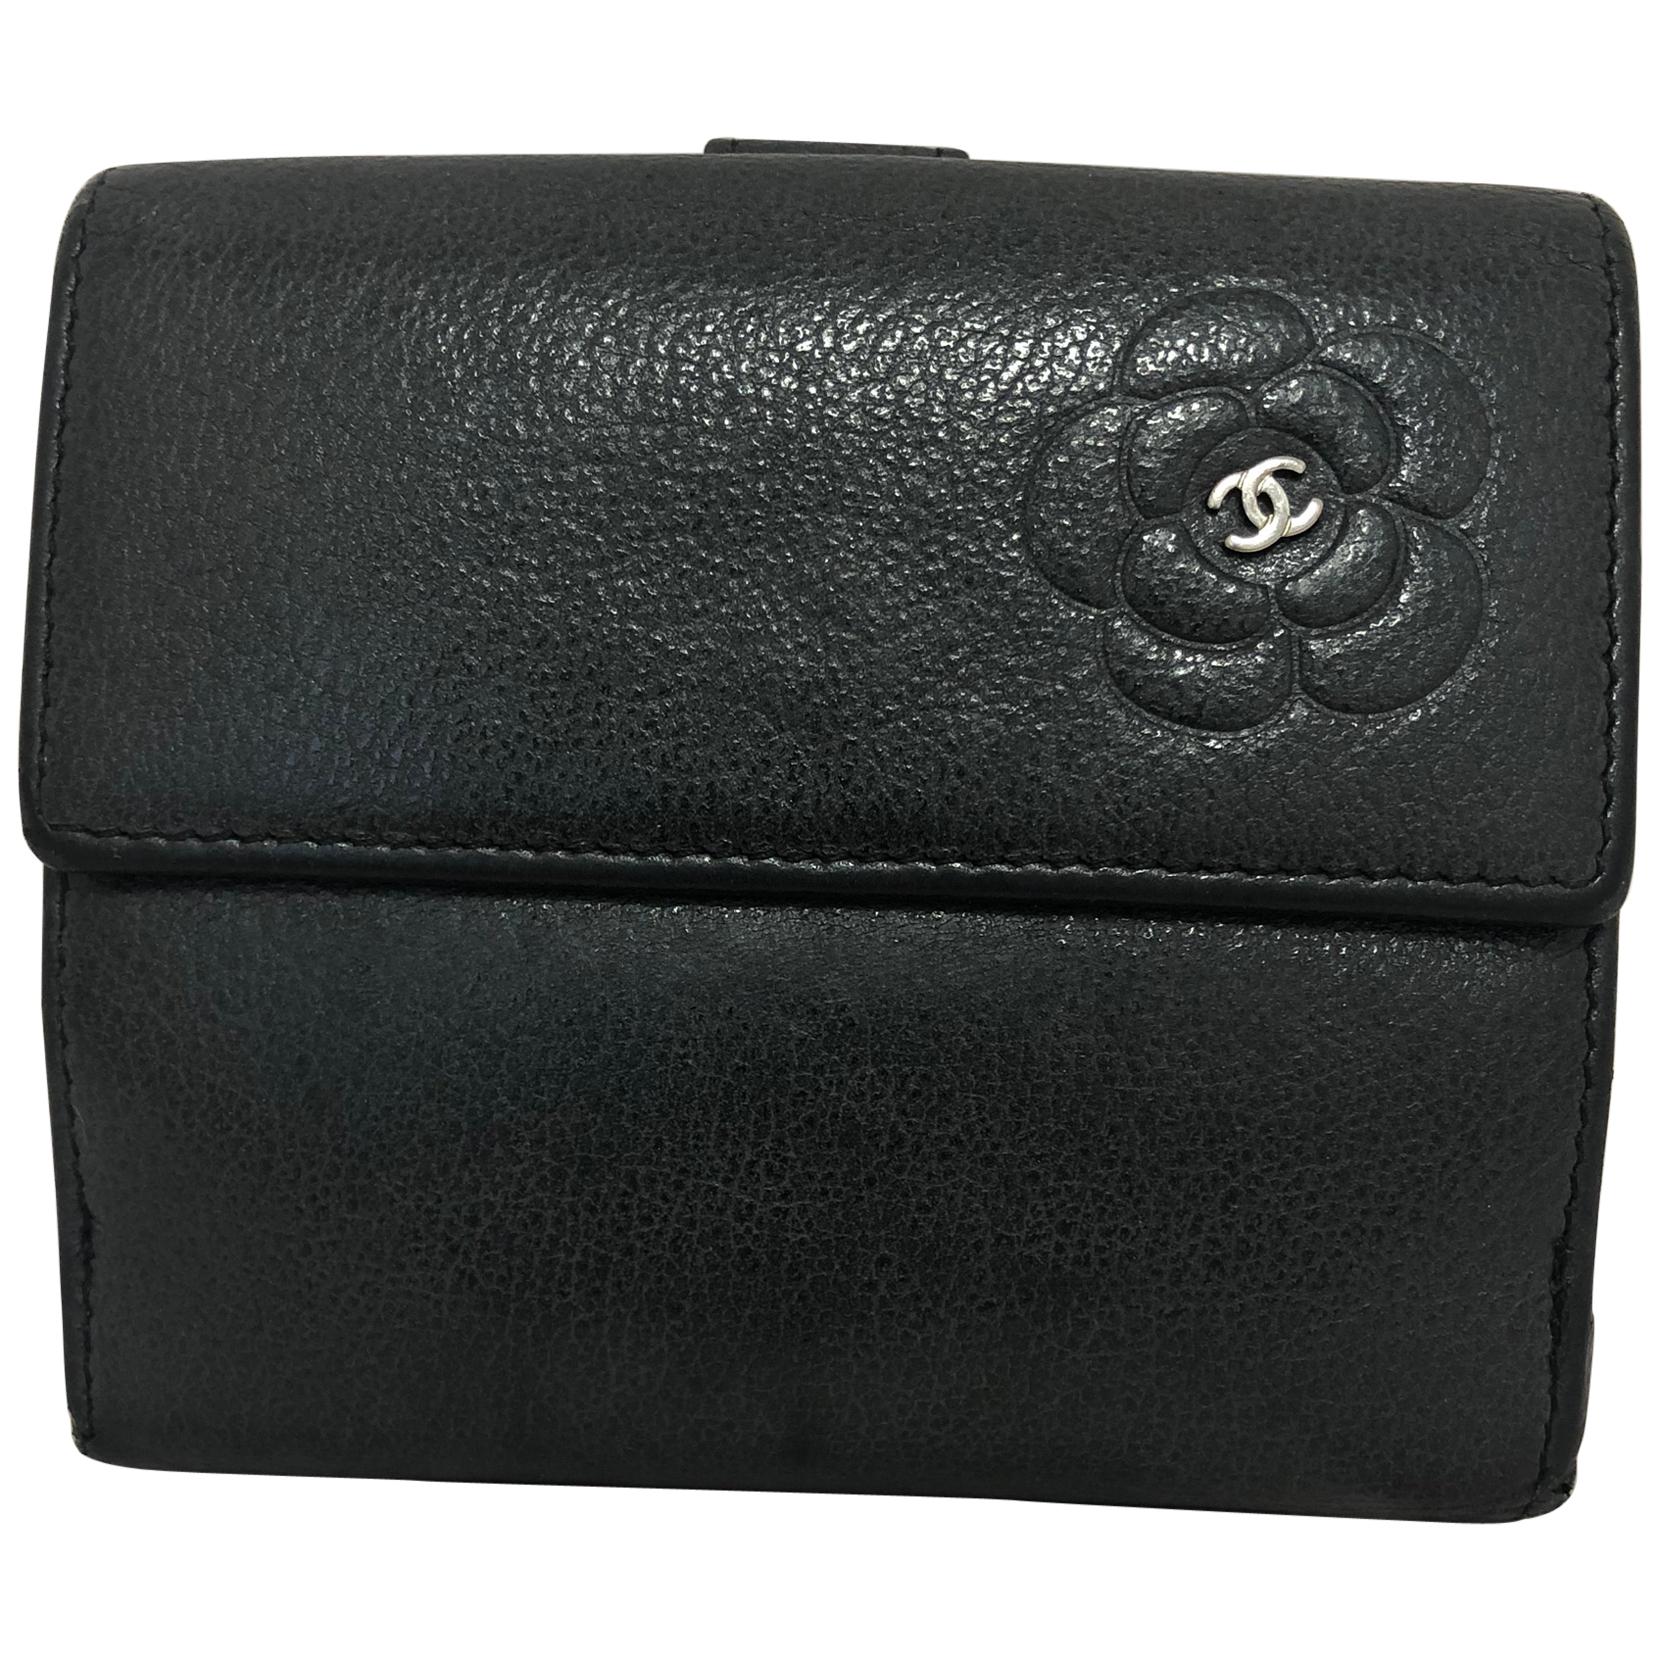 2009/10 Chanel Black Camellia Wallet w/Entrupy Certification and Chanel Card